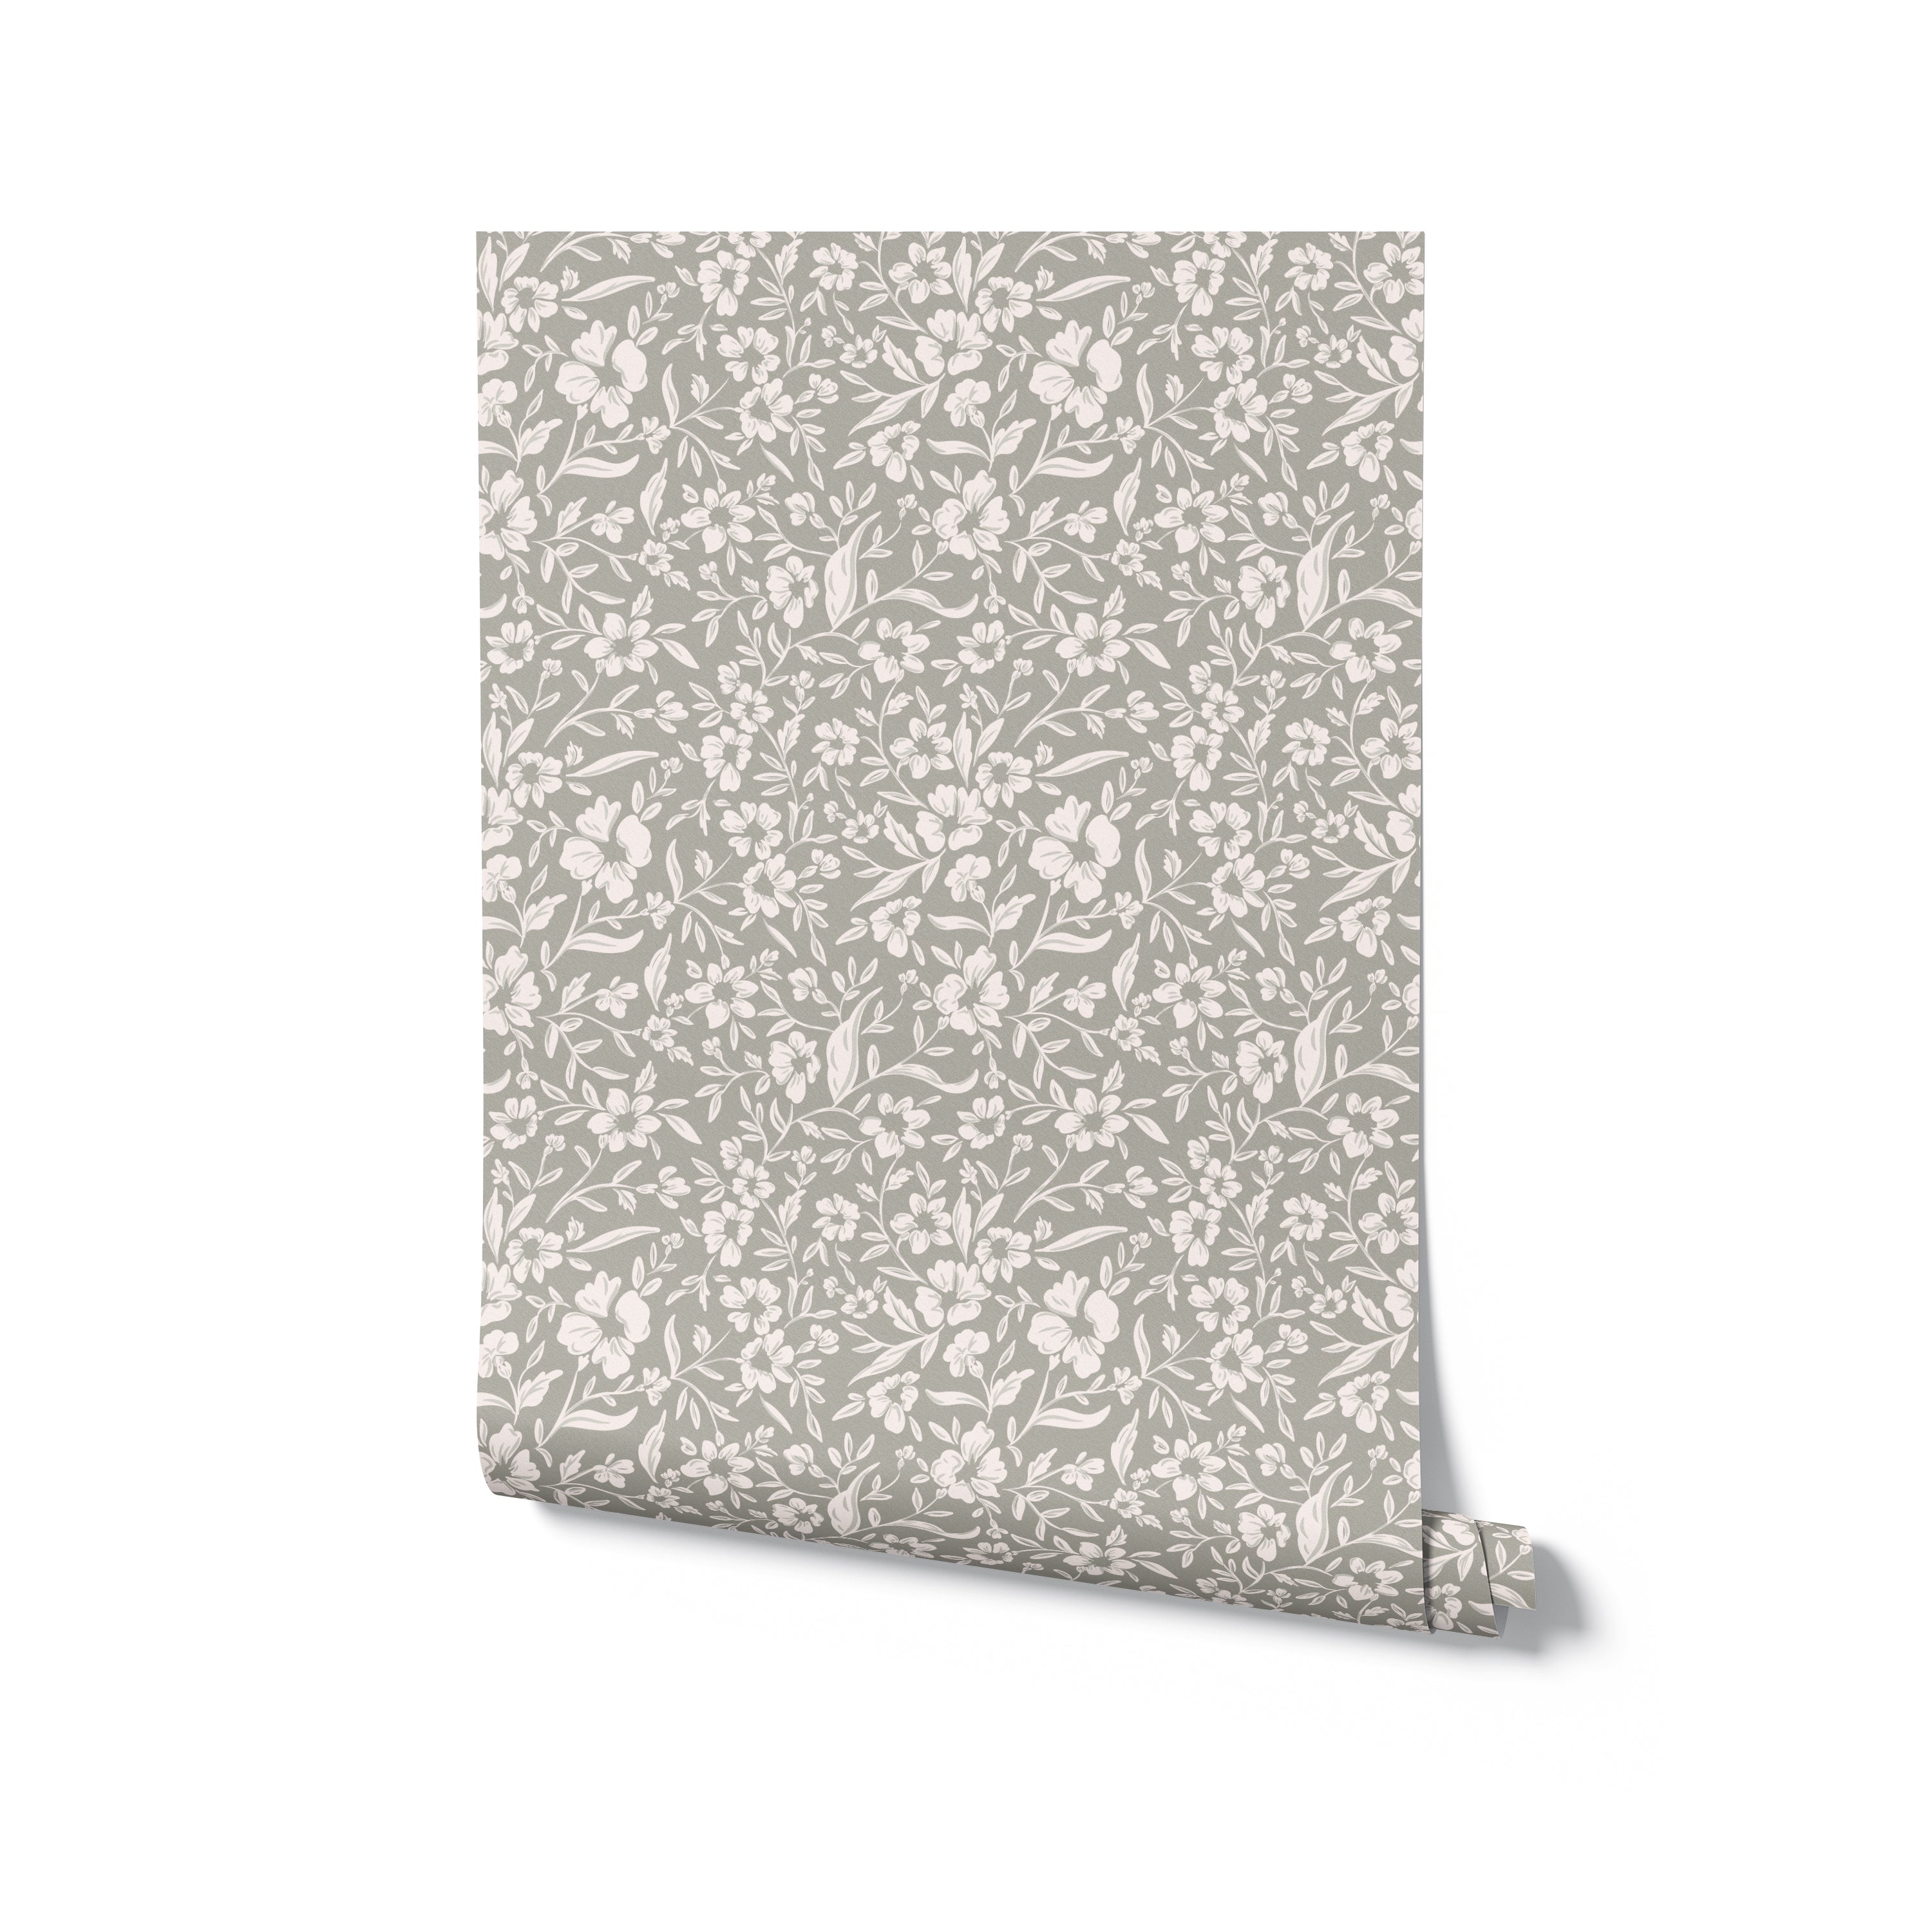 A rolled sample of Soft Meadows Wallpaper highlighting its beautiful and detailed floral pattern in soft white on a light grey background, ideal for adding a gentle, stylish touch to any room.